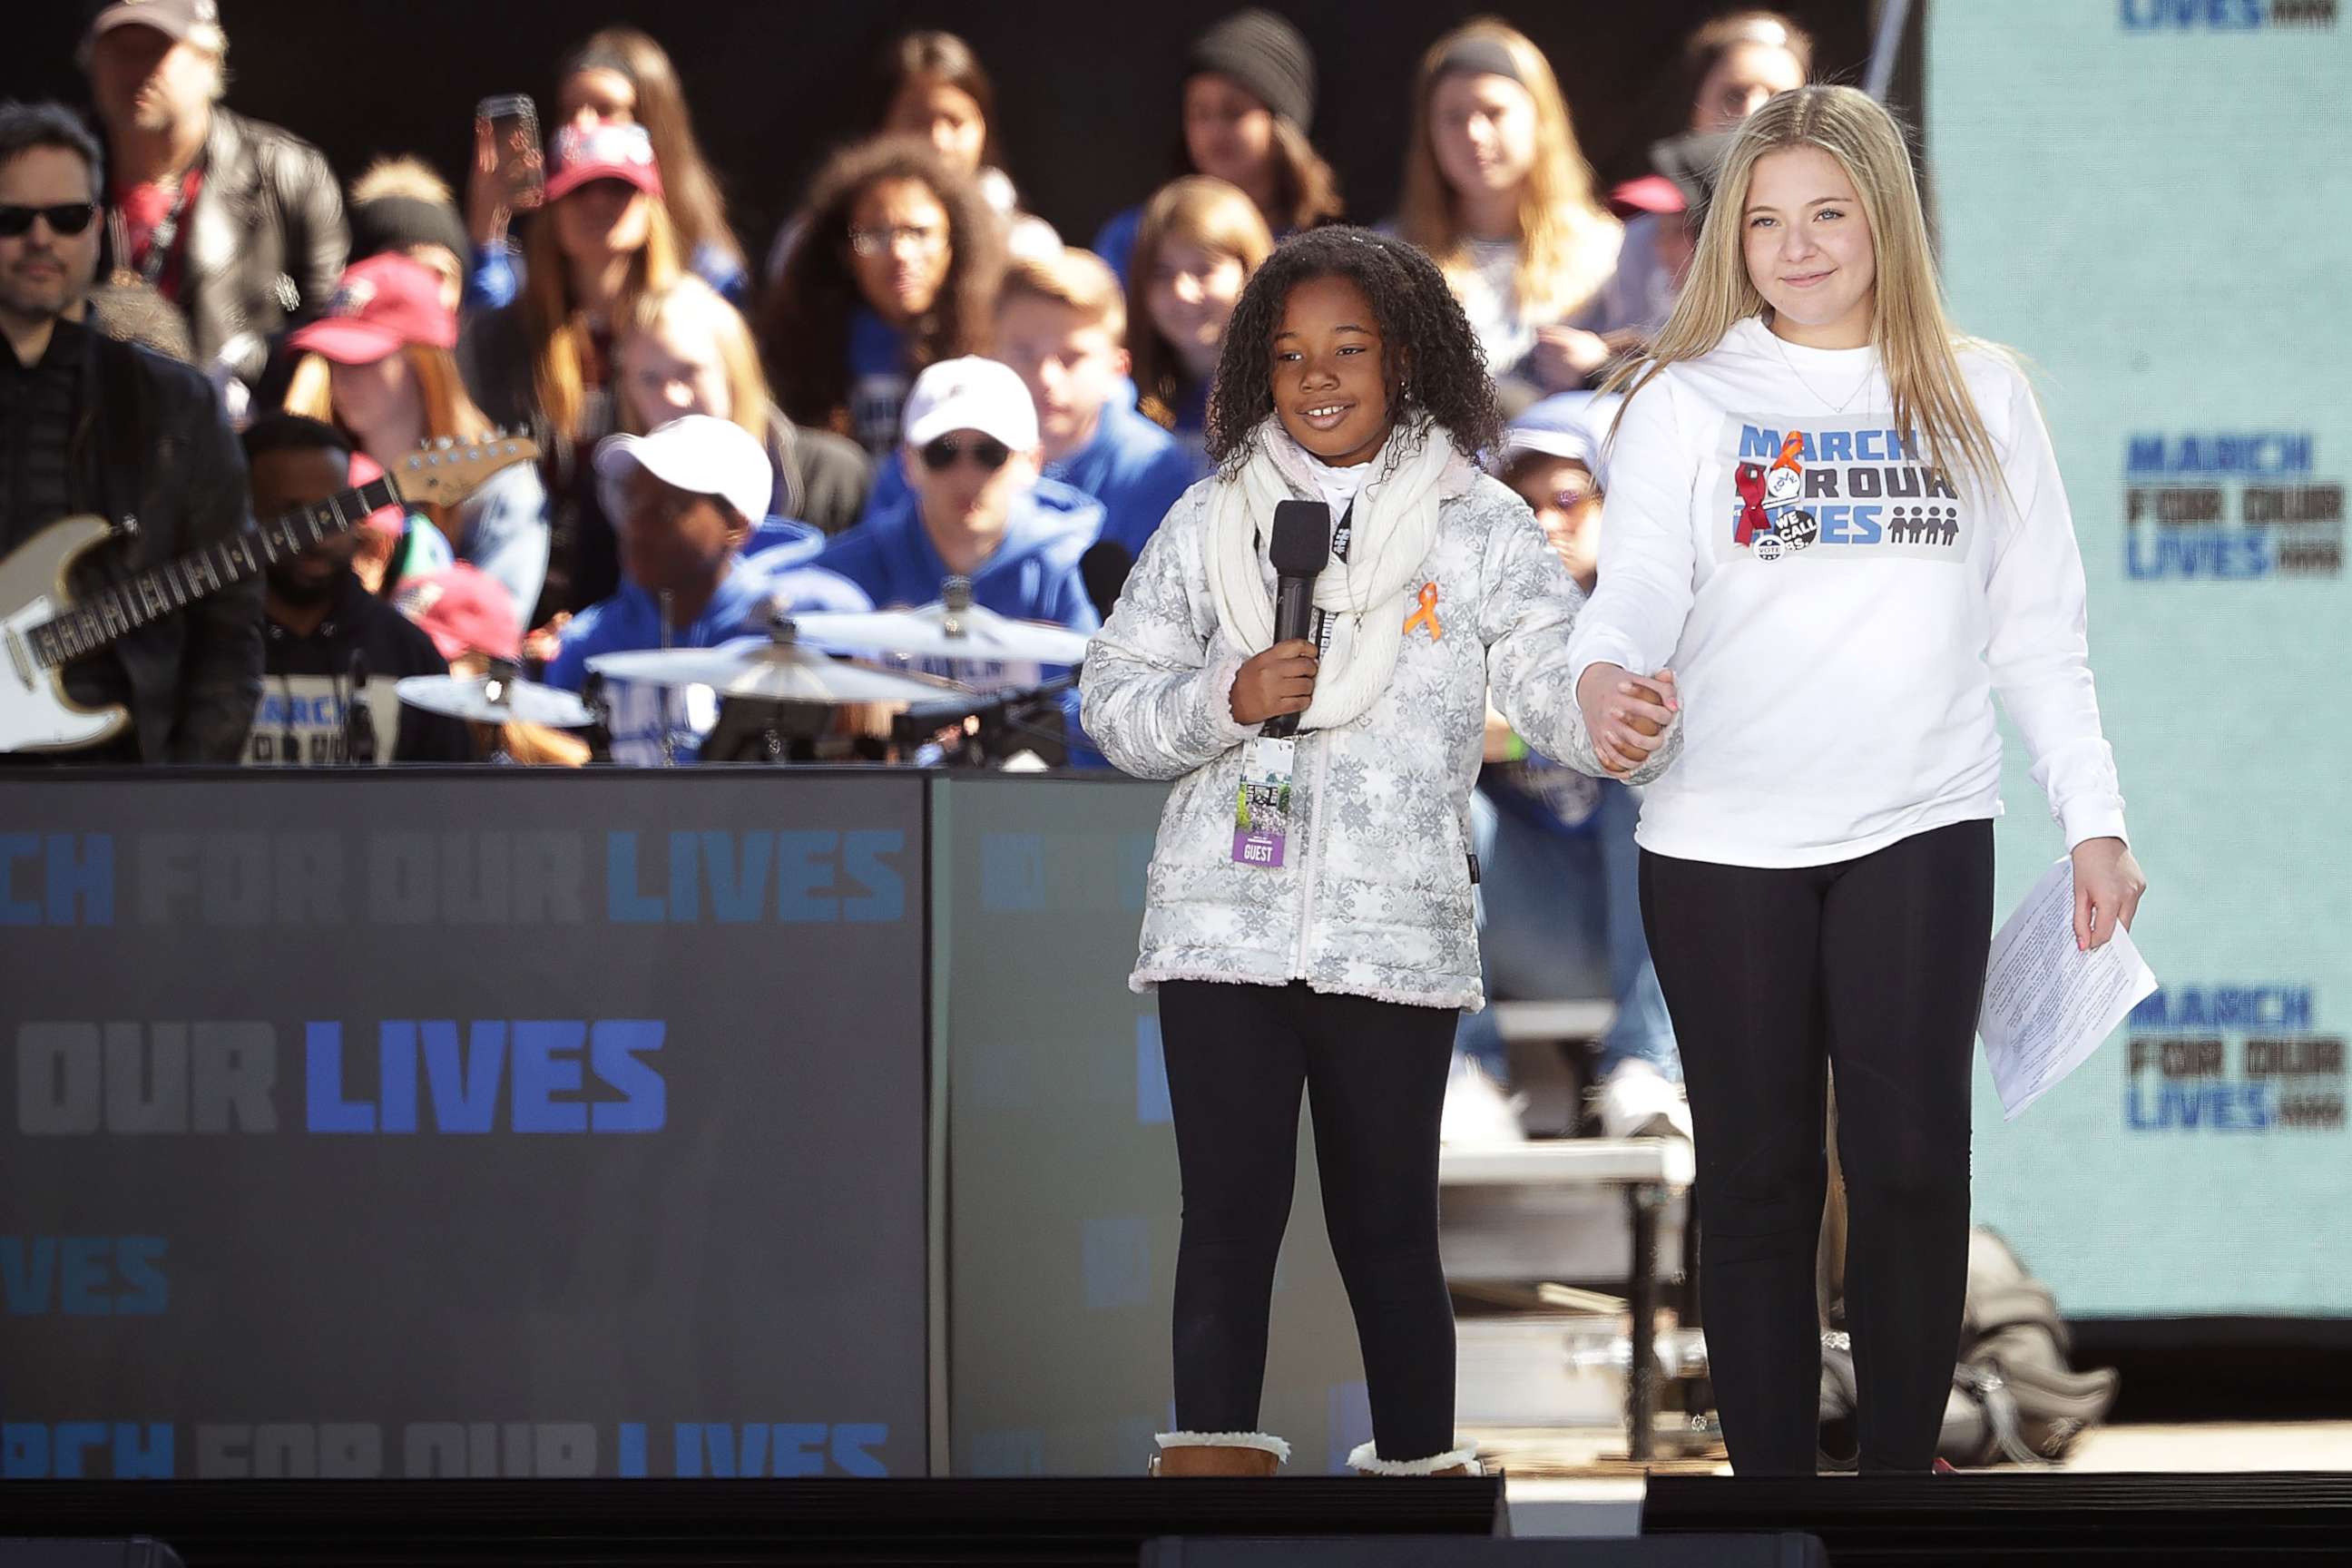 PHOTO: Marjory Stoneman Douglas High School Student Jaclyn Corin ,right, and Yolanda Renee King, granddaughter of Dr. Martin Luther King, Jr. addresses the March for Our Lives rally, March 24, 2018, in Washington, D.C.